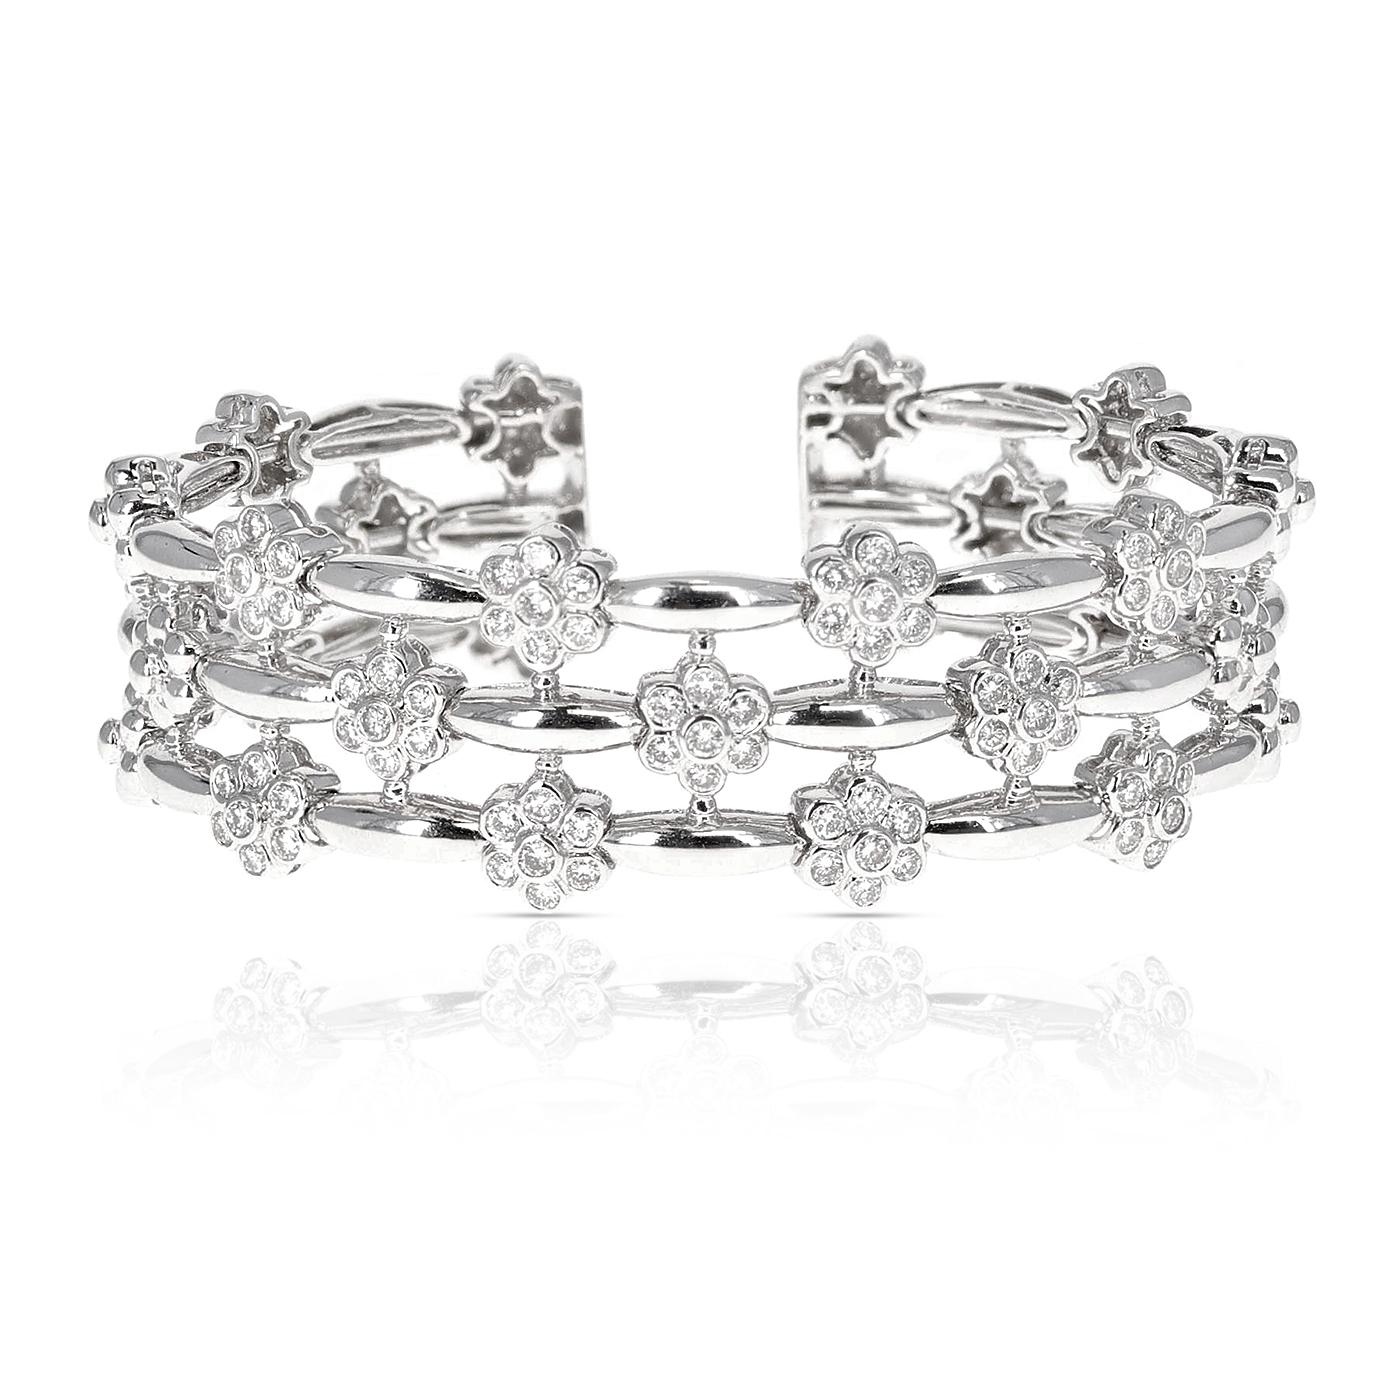 A 2.75 ct. Diamond Floral Expandable Bangle Cuff made in 18 Karat White Gold. The total weight of the bangle is 57.60 grams. The wrist size is 7 inches. 
 